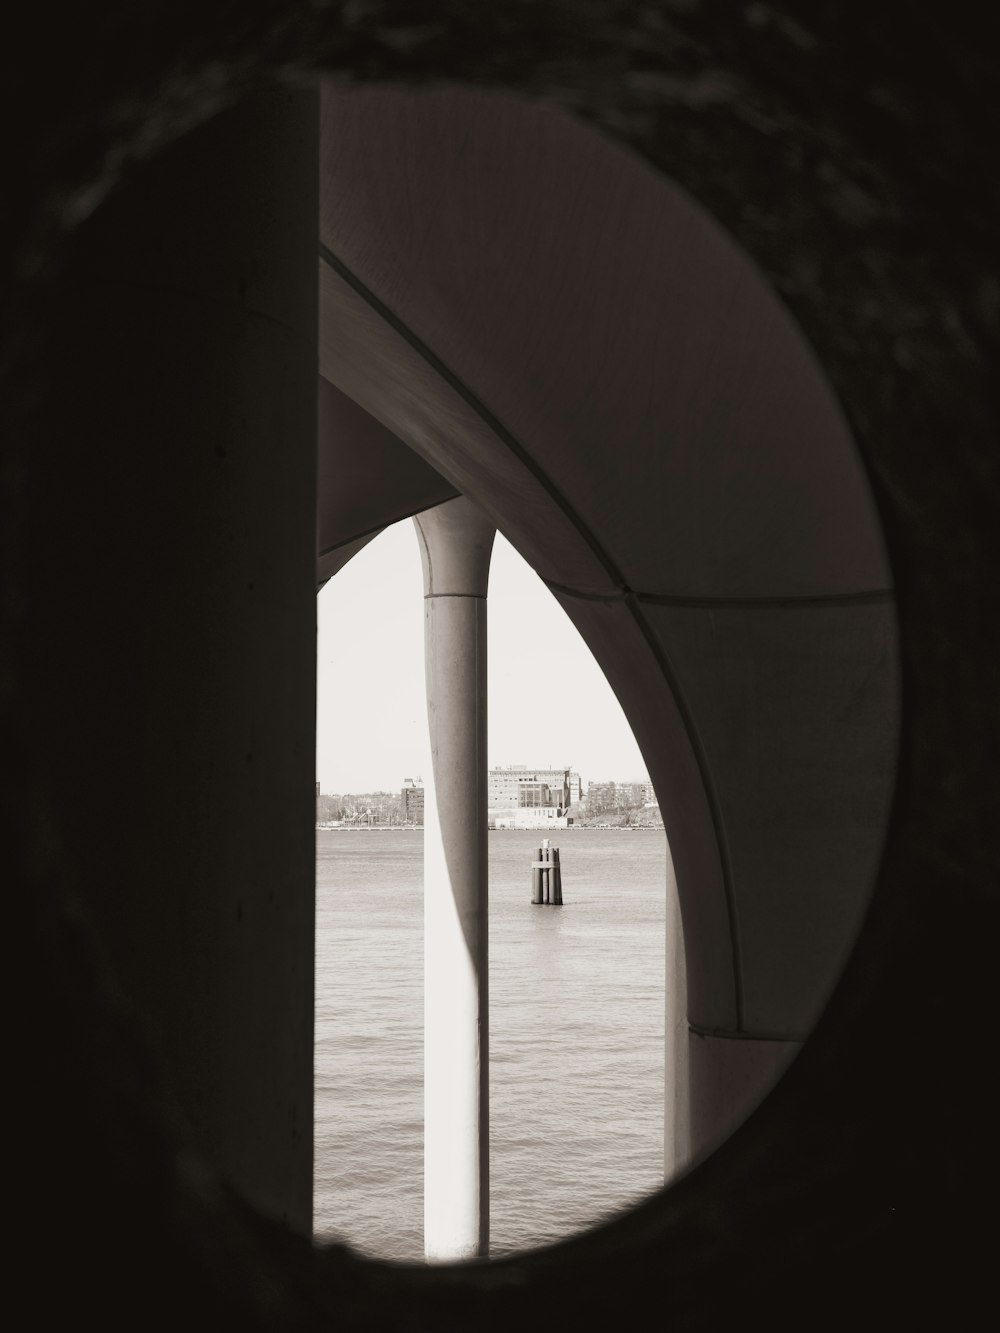 a view of a body of water through a circular window